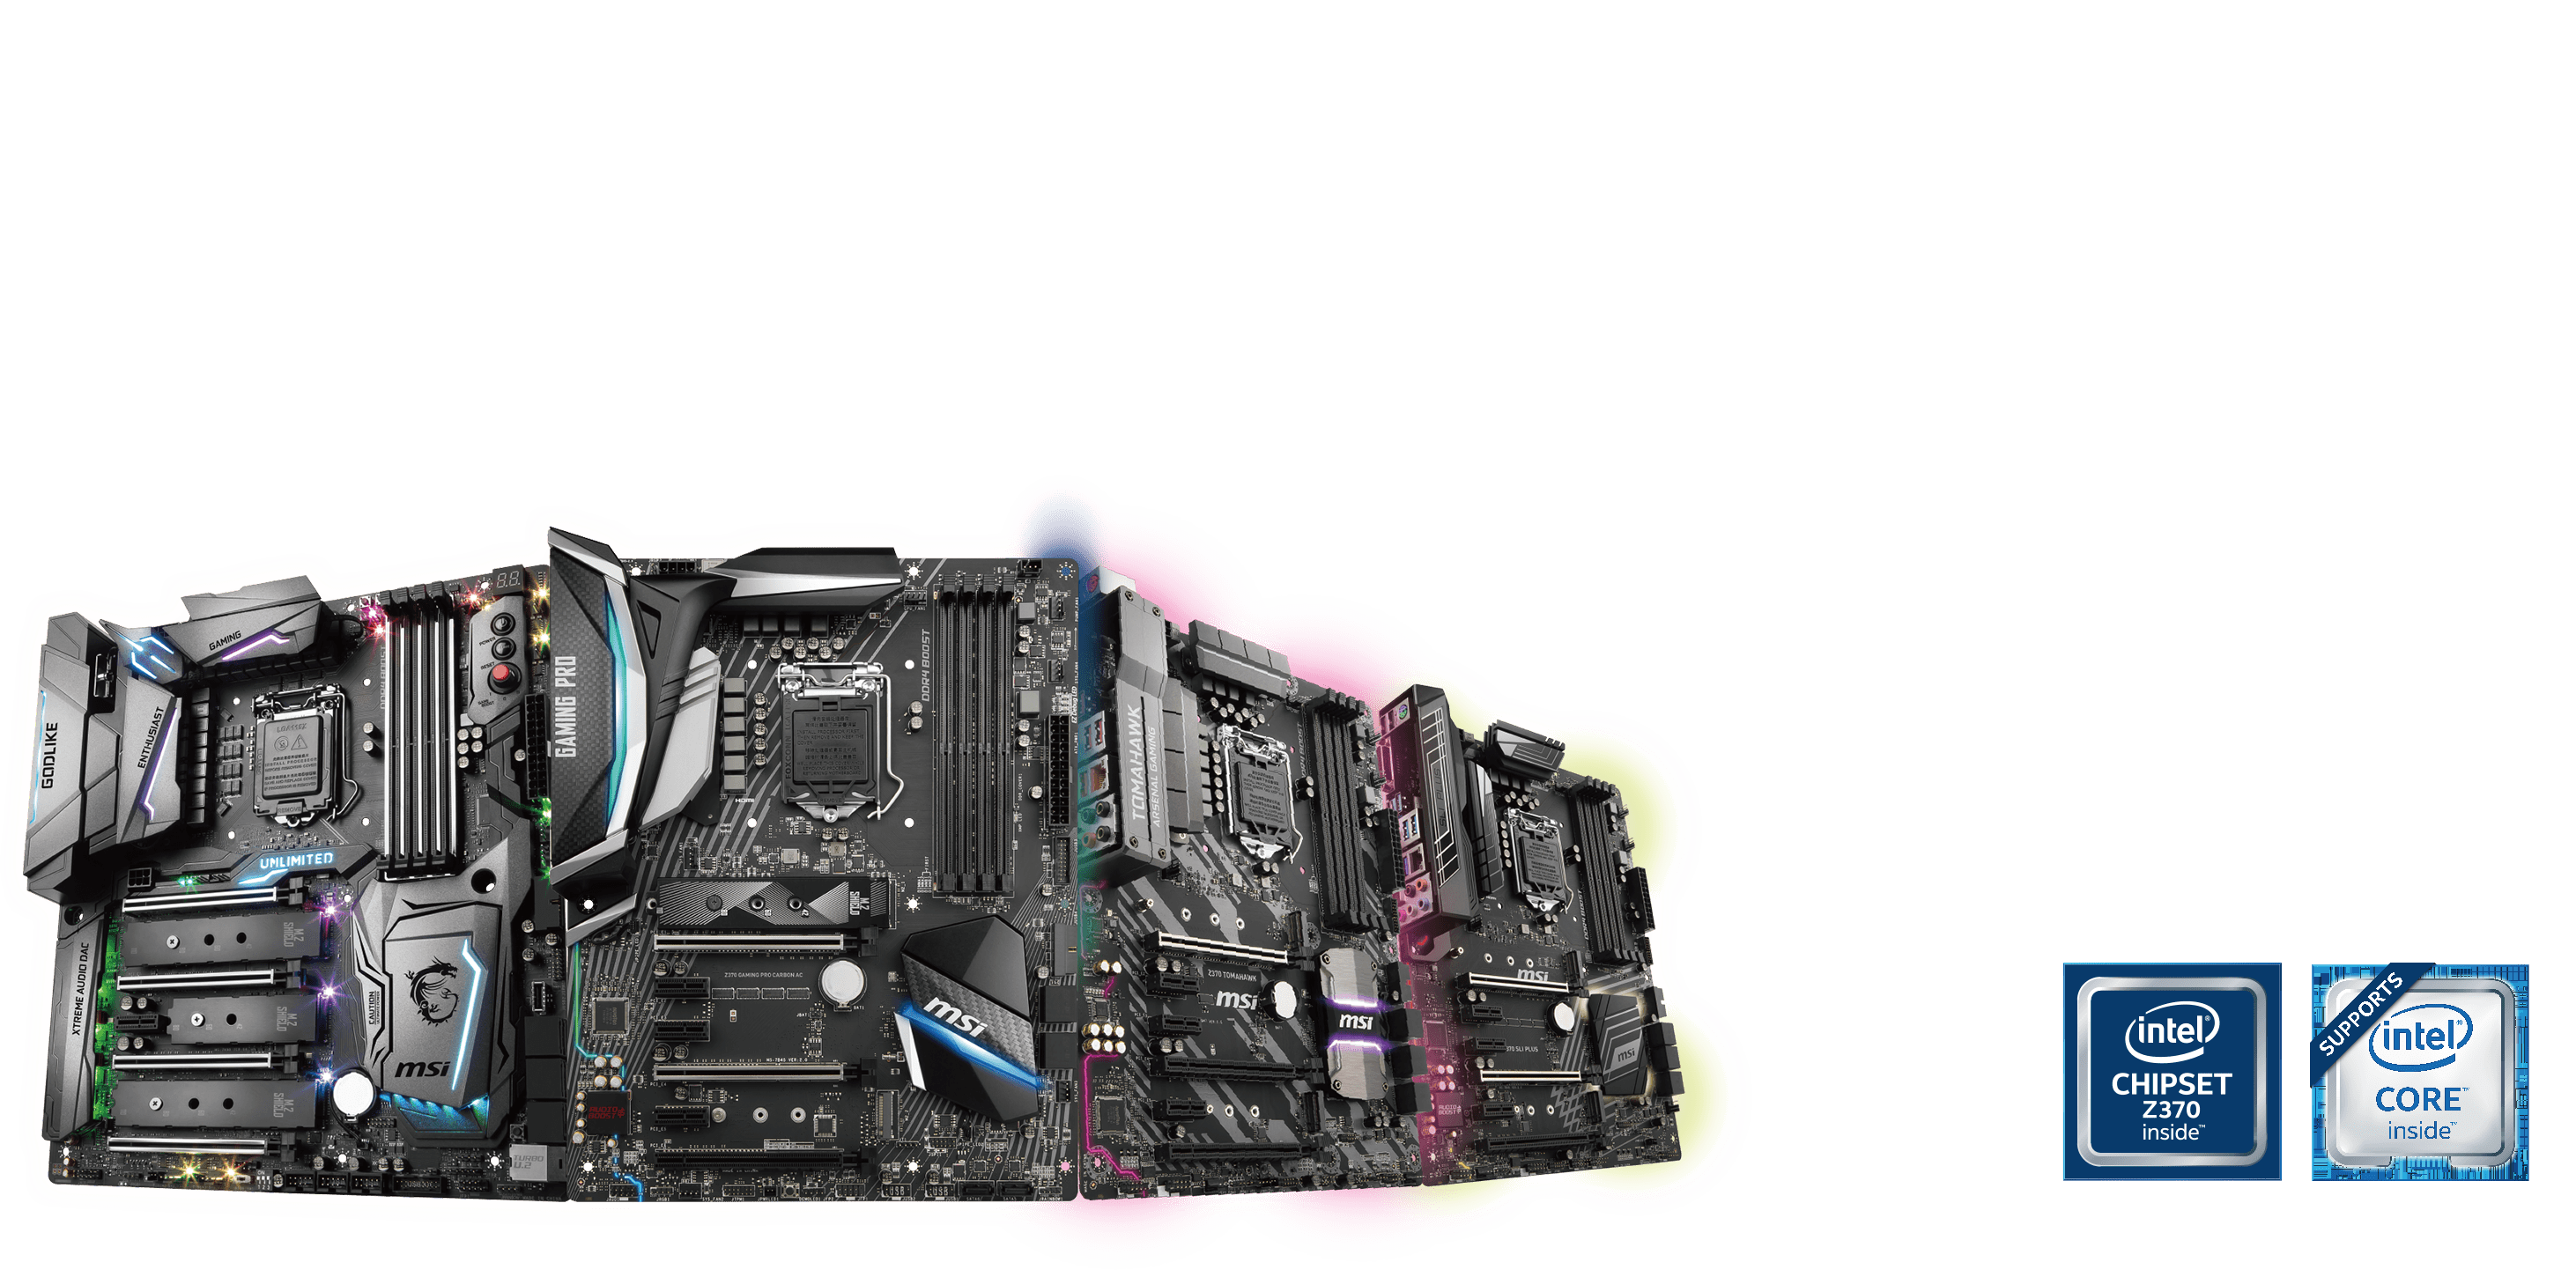 MSI Z370 Motherboard Range Overview from Novatech